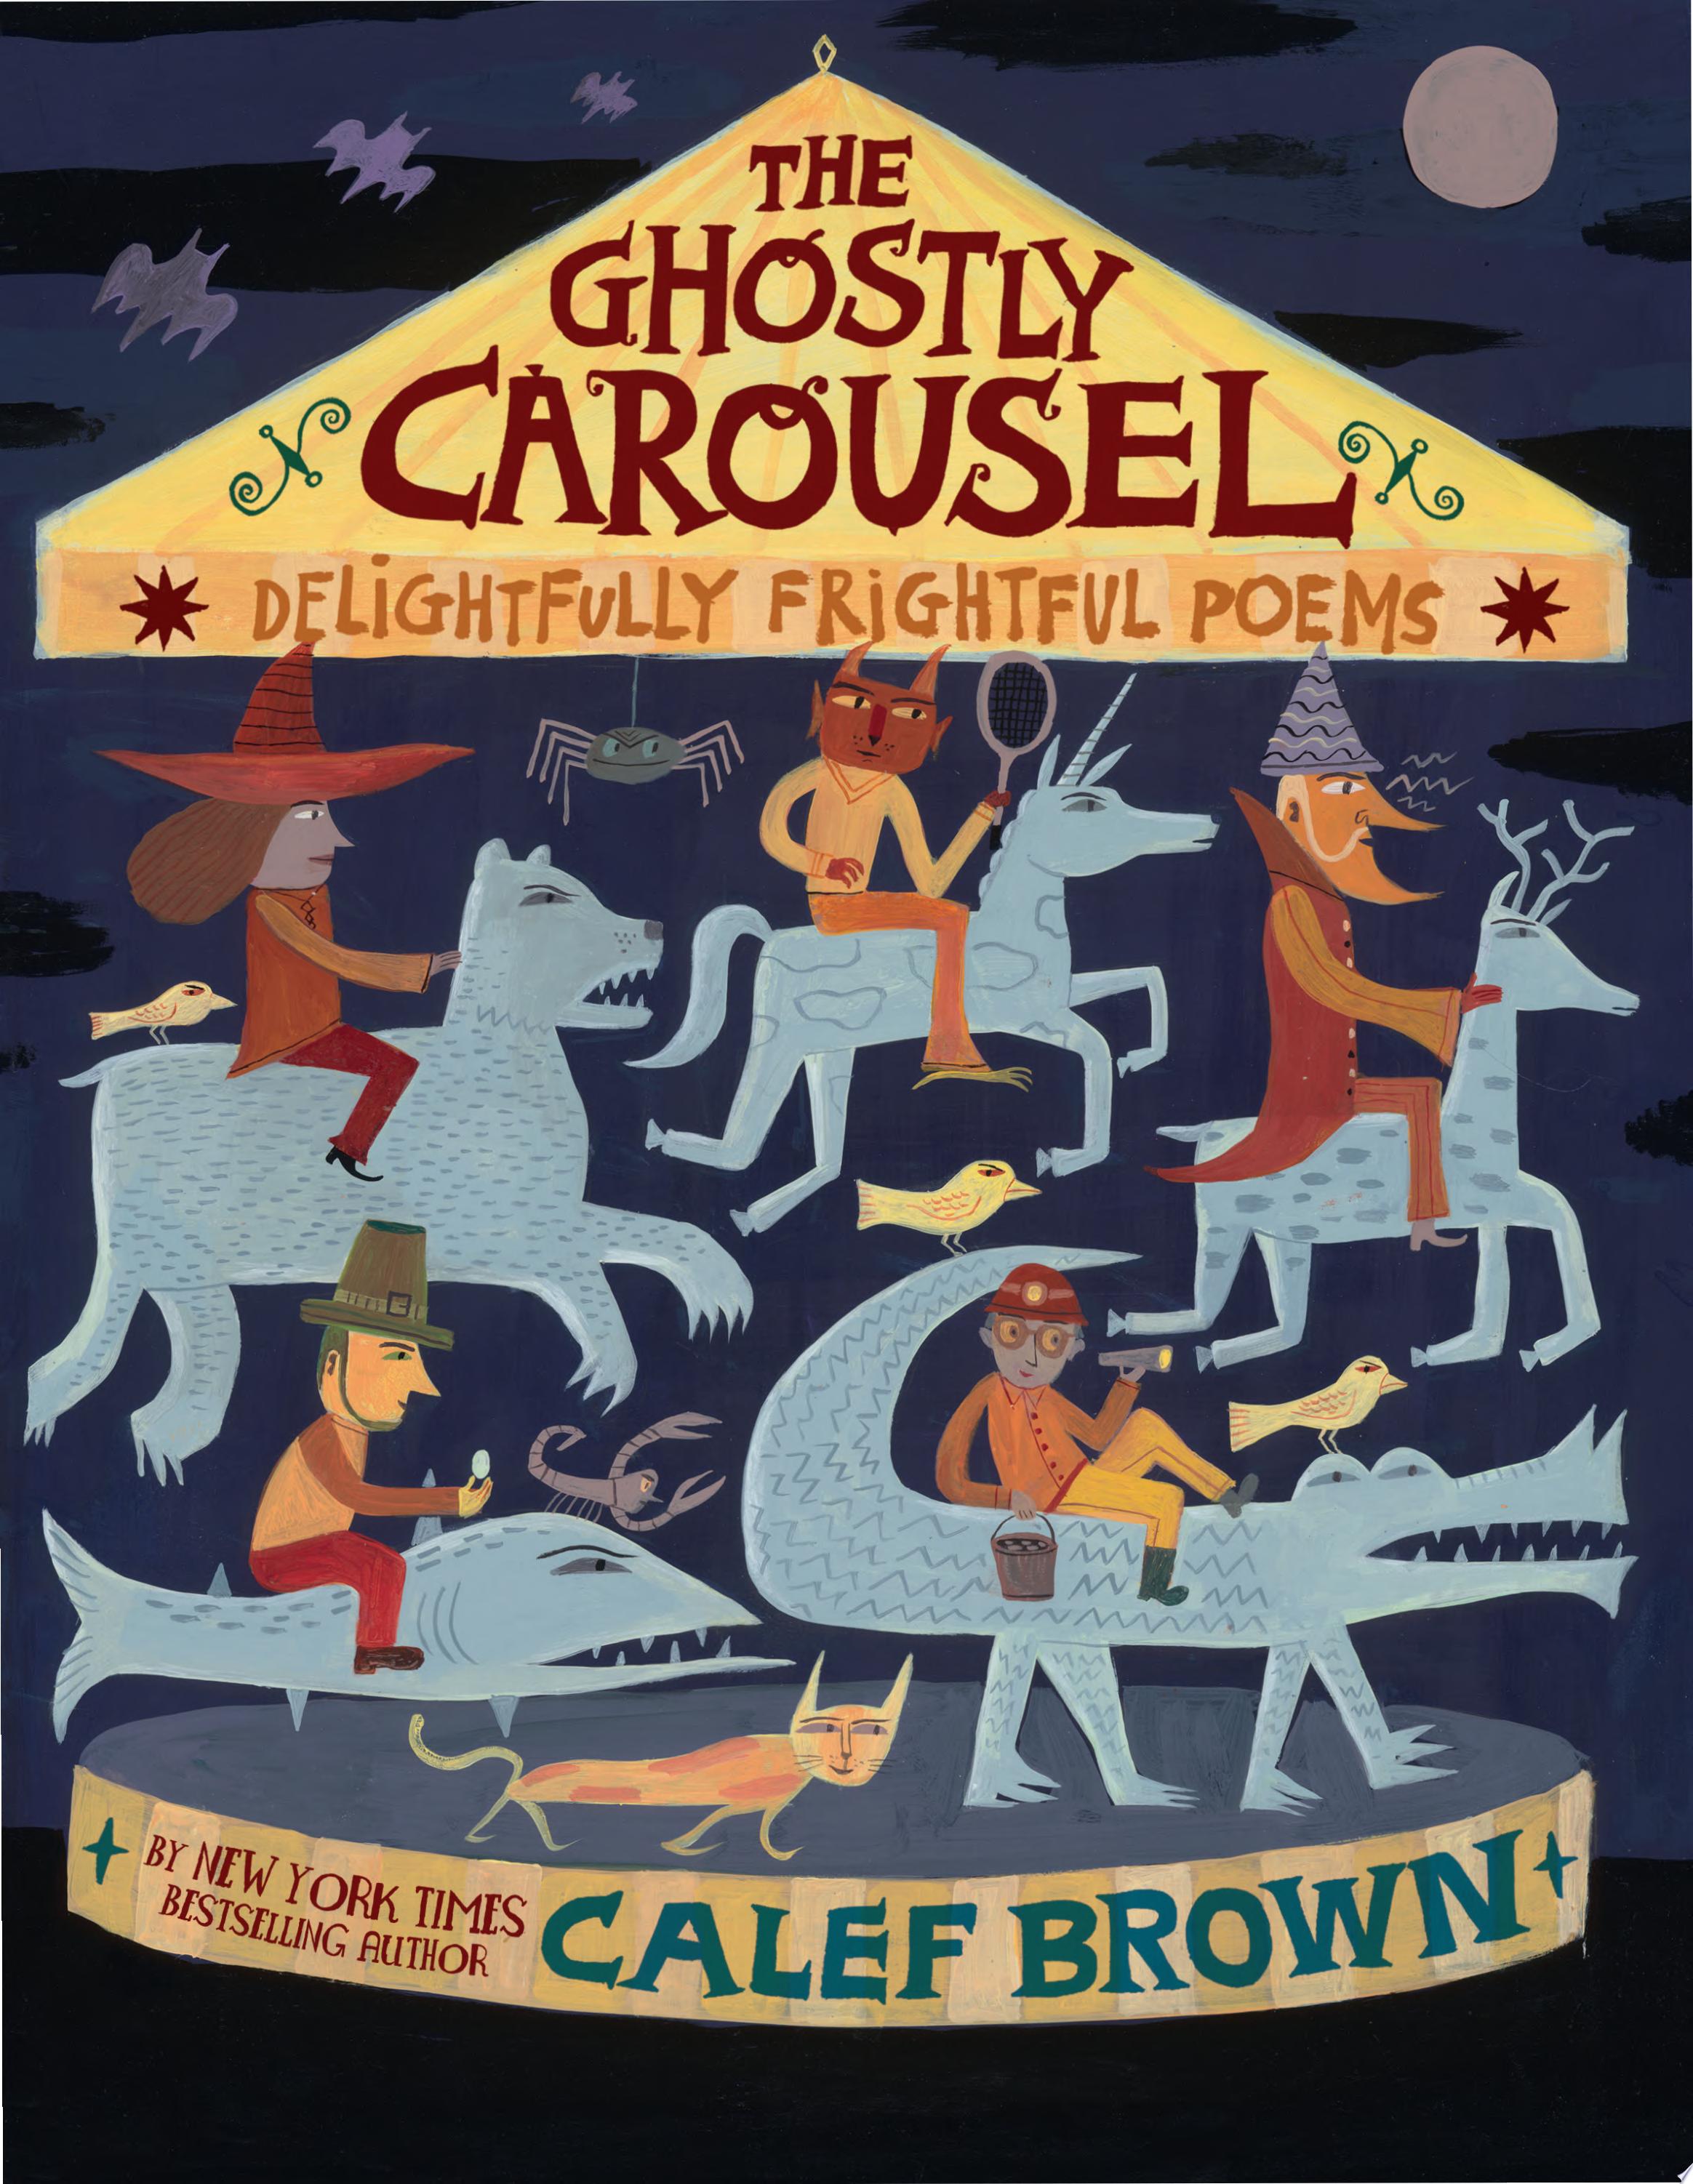 Image for "The Ghostly Carousel"